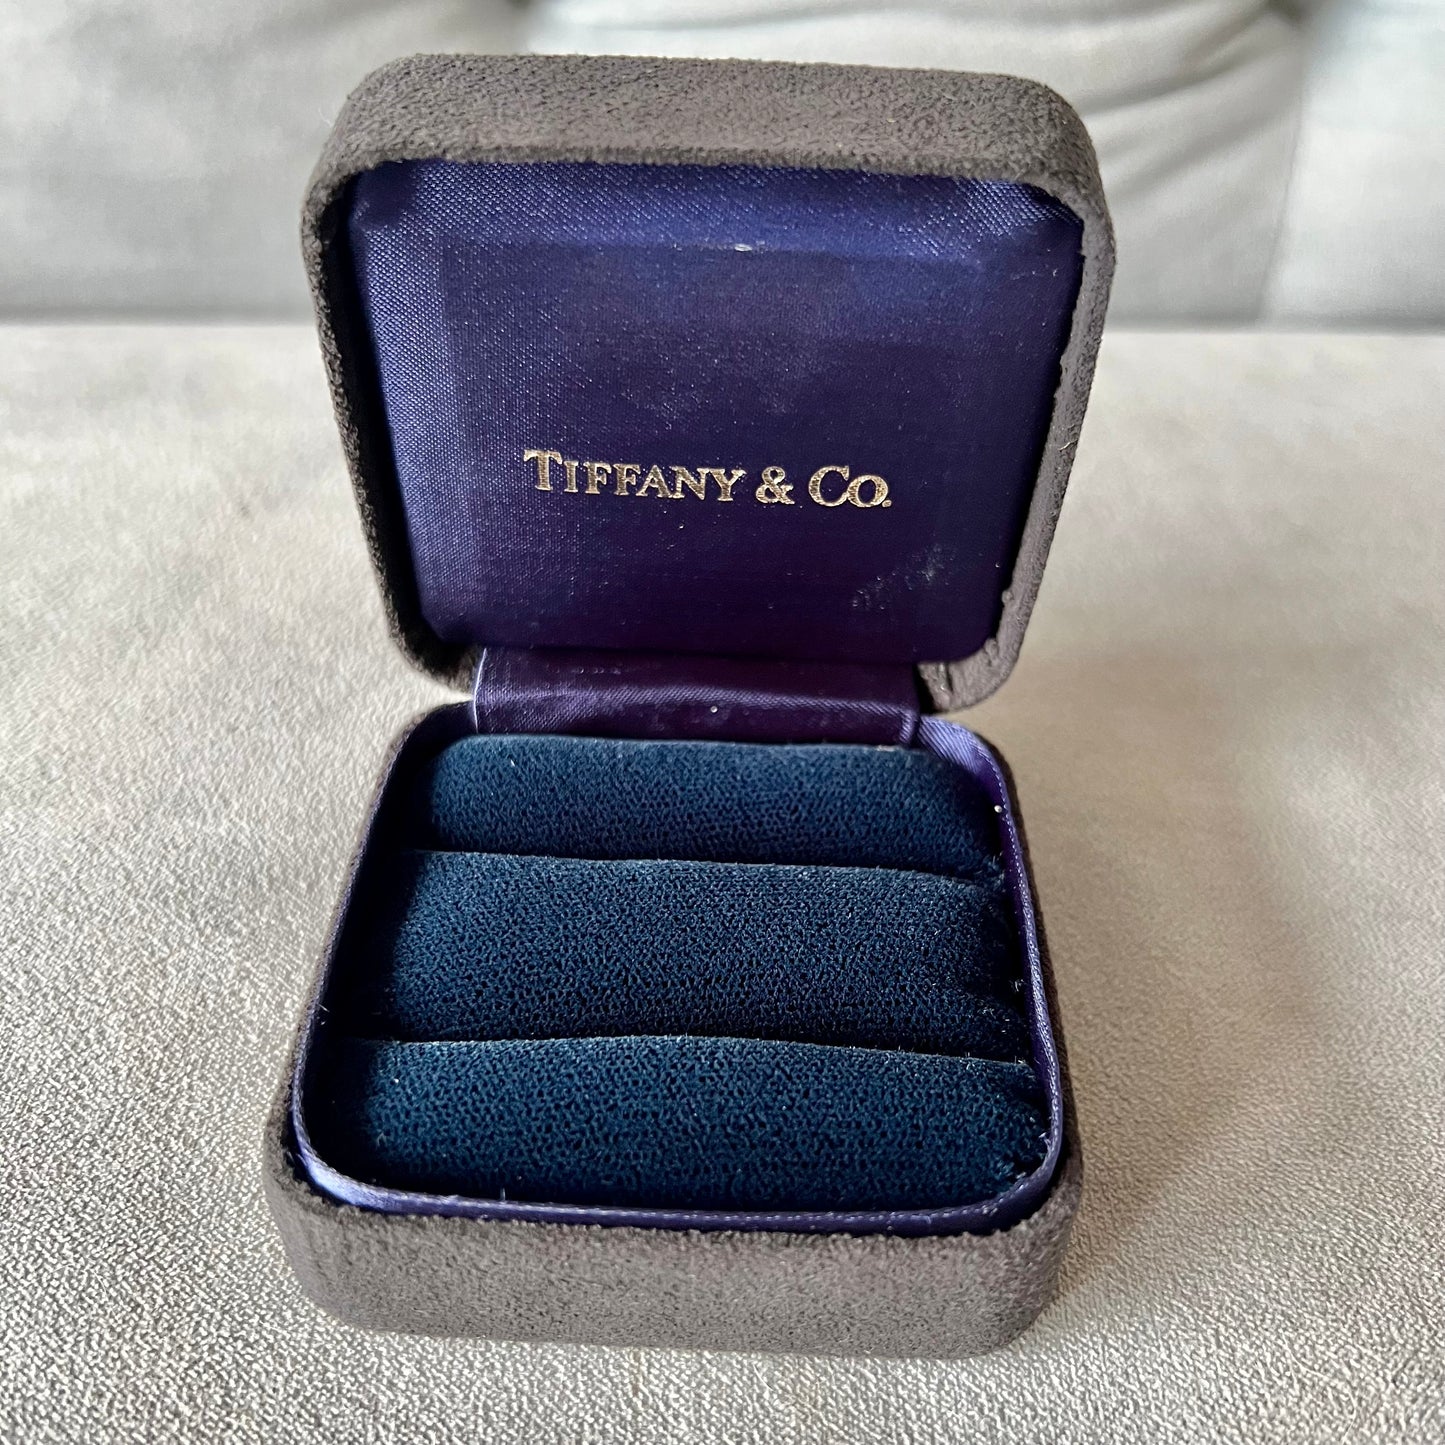 TIFFANY & CO. Double Alliance Ring Box + Outer Box 3.25x3.25x1.90 inches